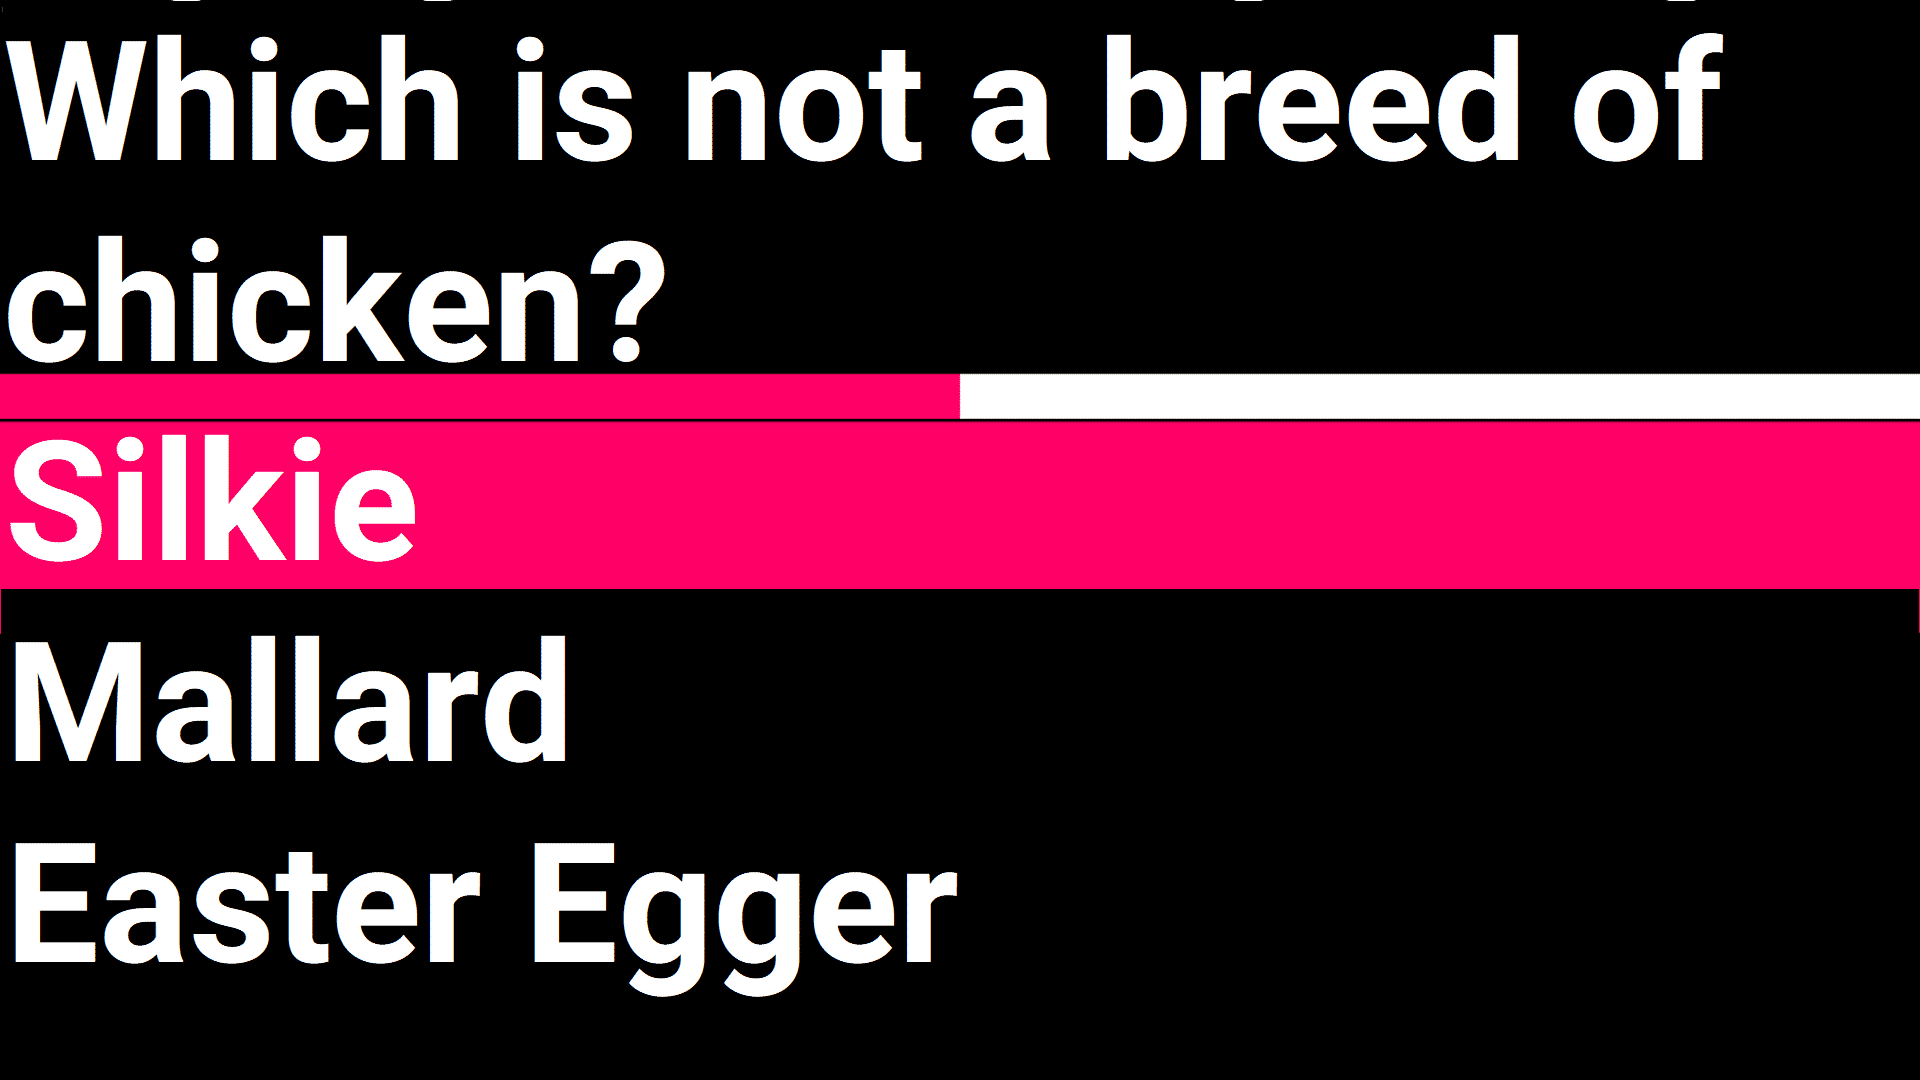 Quick Cards screenshot - Which is not a breed of chicken? silkie mallad easter egger